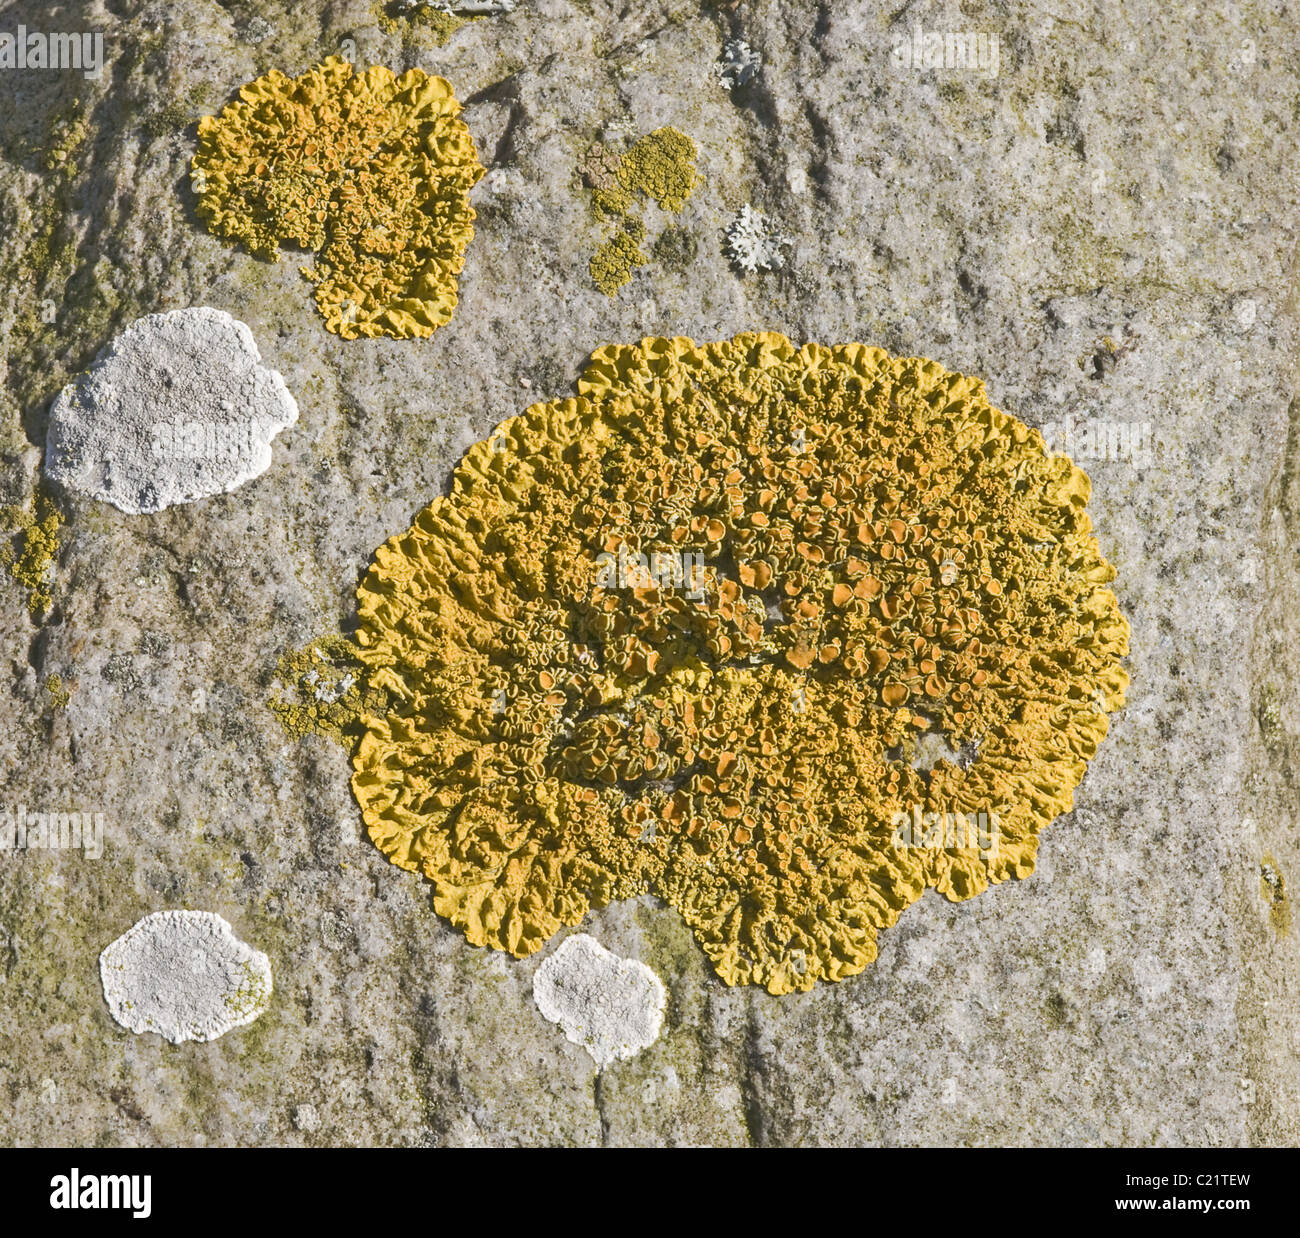 Xanthoria parietina Common Yellow Lichen growing on a stone wall alongside another lichen species Stock Photo